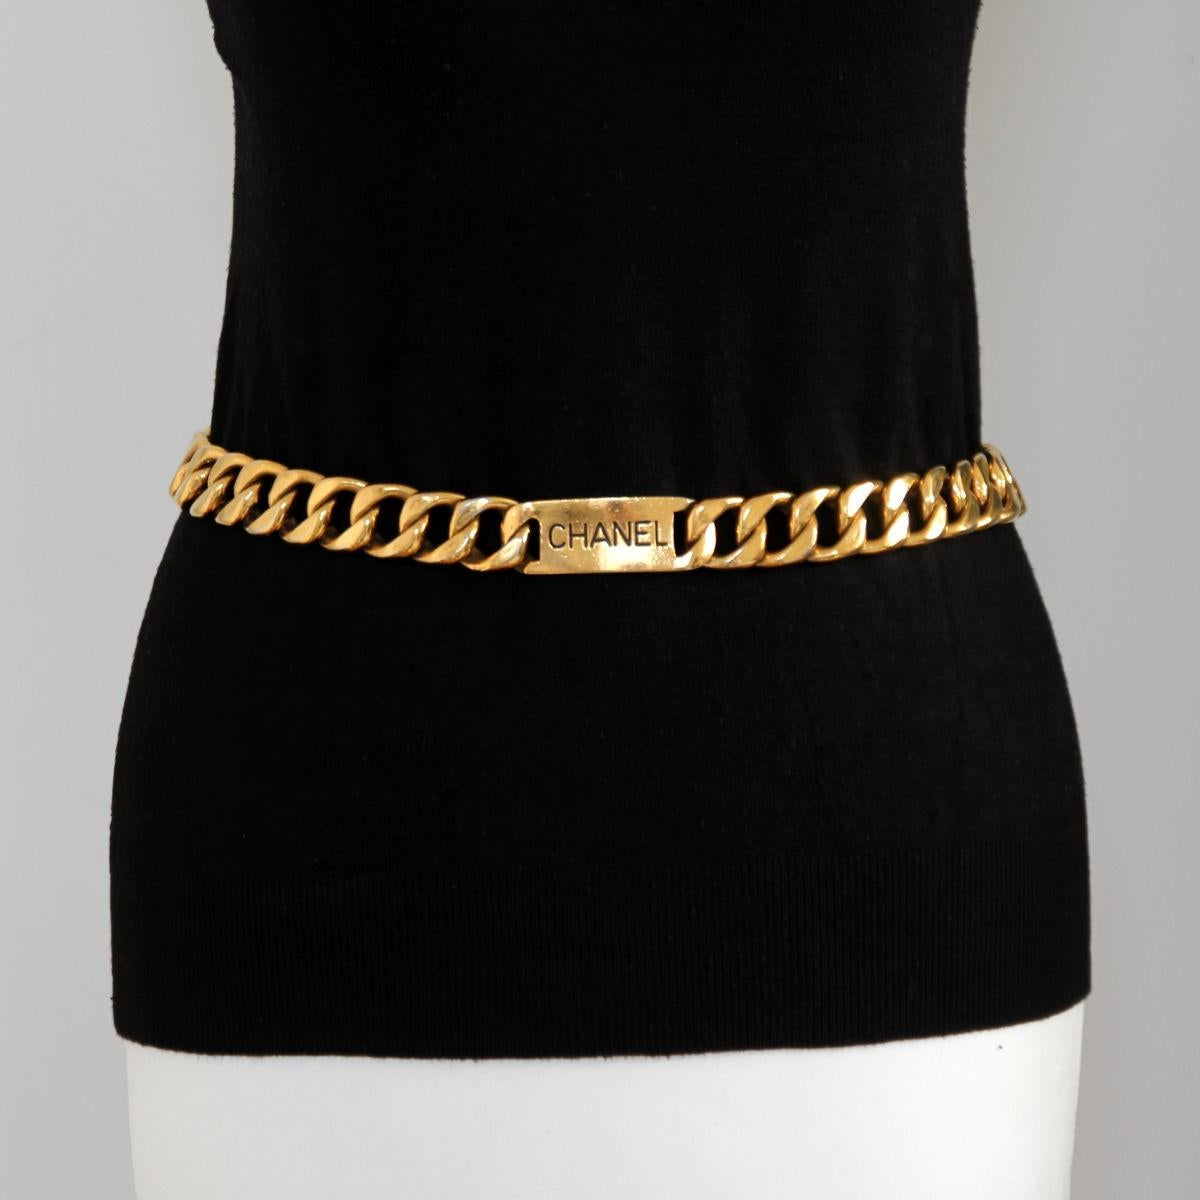 CHANEL 1990s Gold Toned Jumbo Chain Belt / Necklace With Chanel Plaque 3